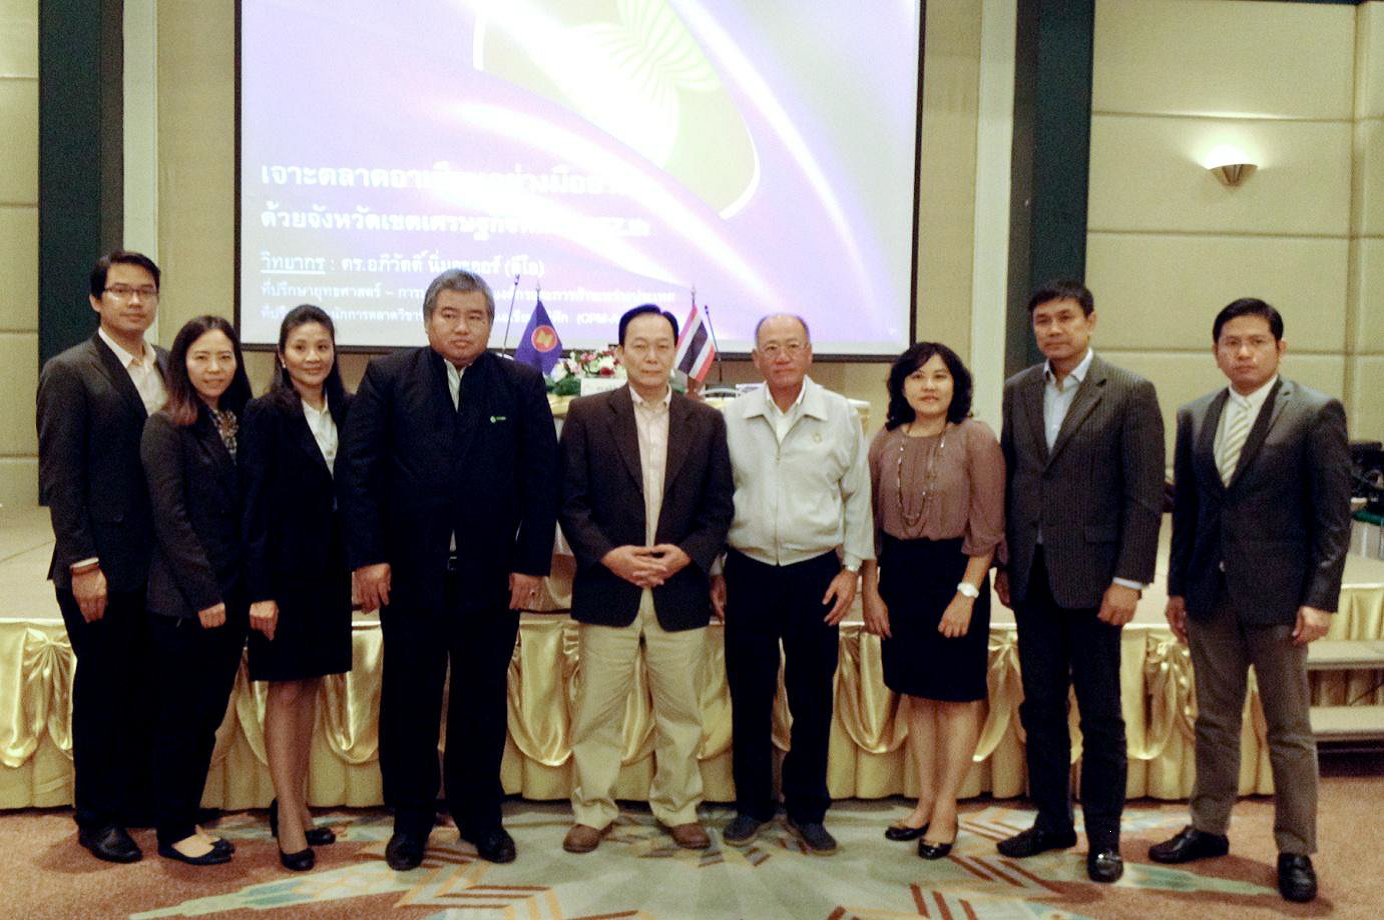 EXIM Thailand and TNSC Hold Seminar to Promote Trade and Investment in Border Areas and Special Economic Development Zones